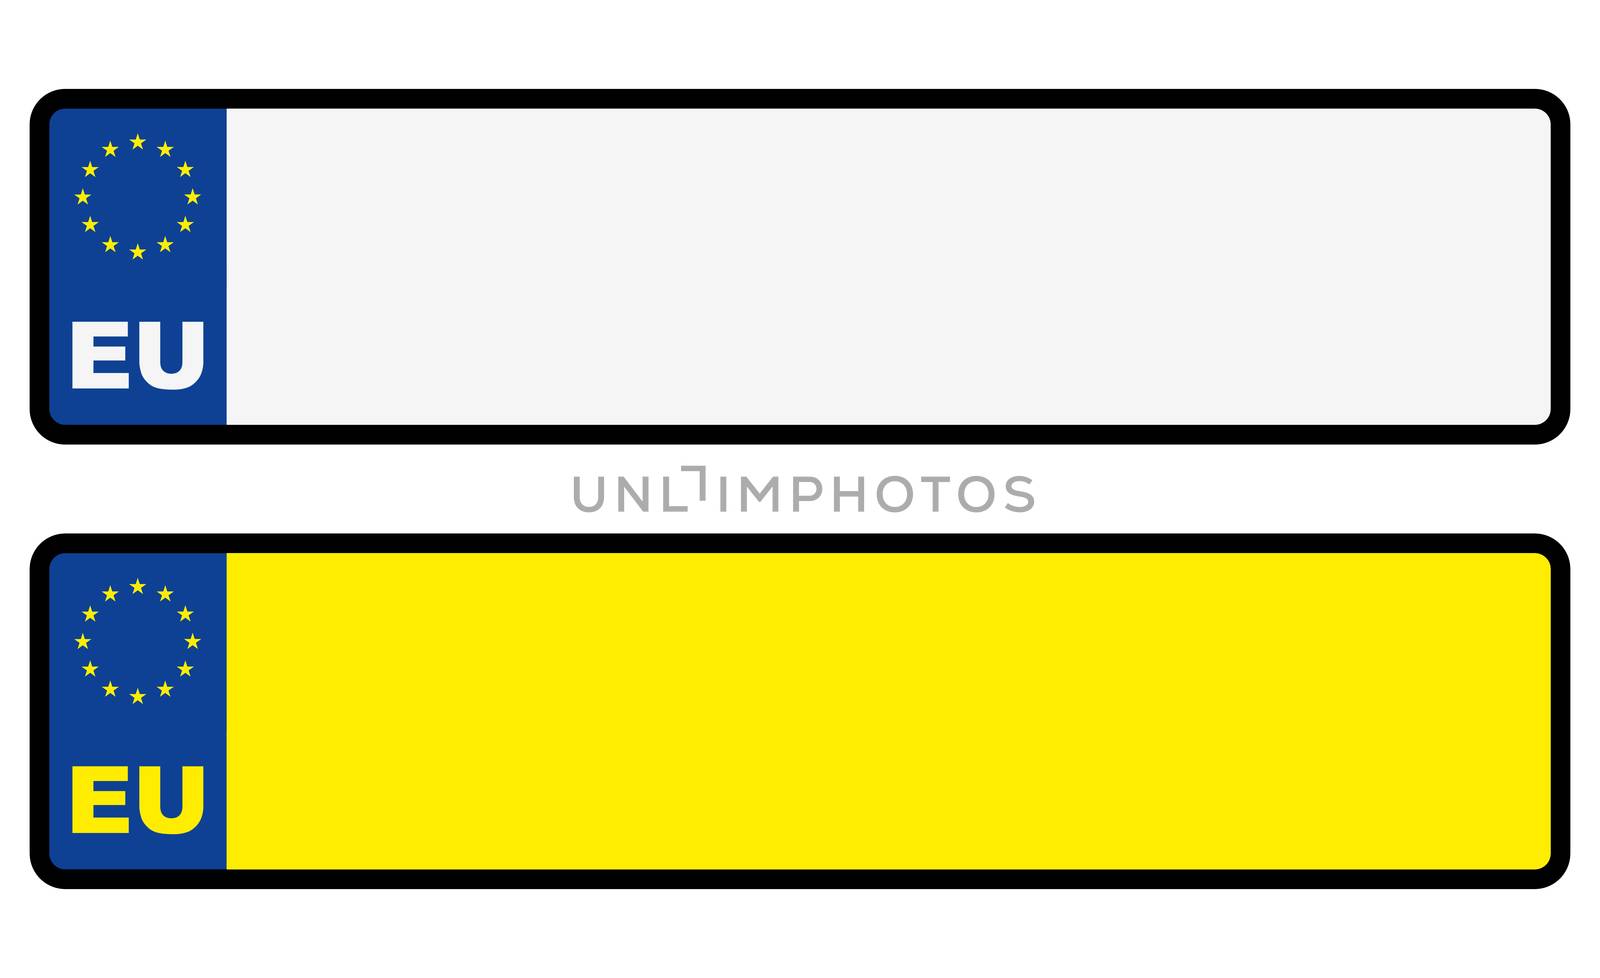 Abstract European car blank number plate or empty EU automobile registration license tag in white and yellow variations isolated with free copy-space area for your text